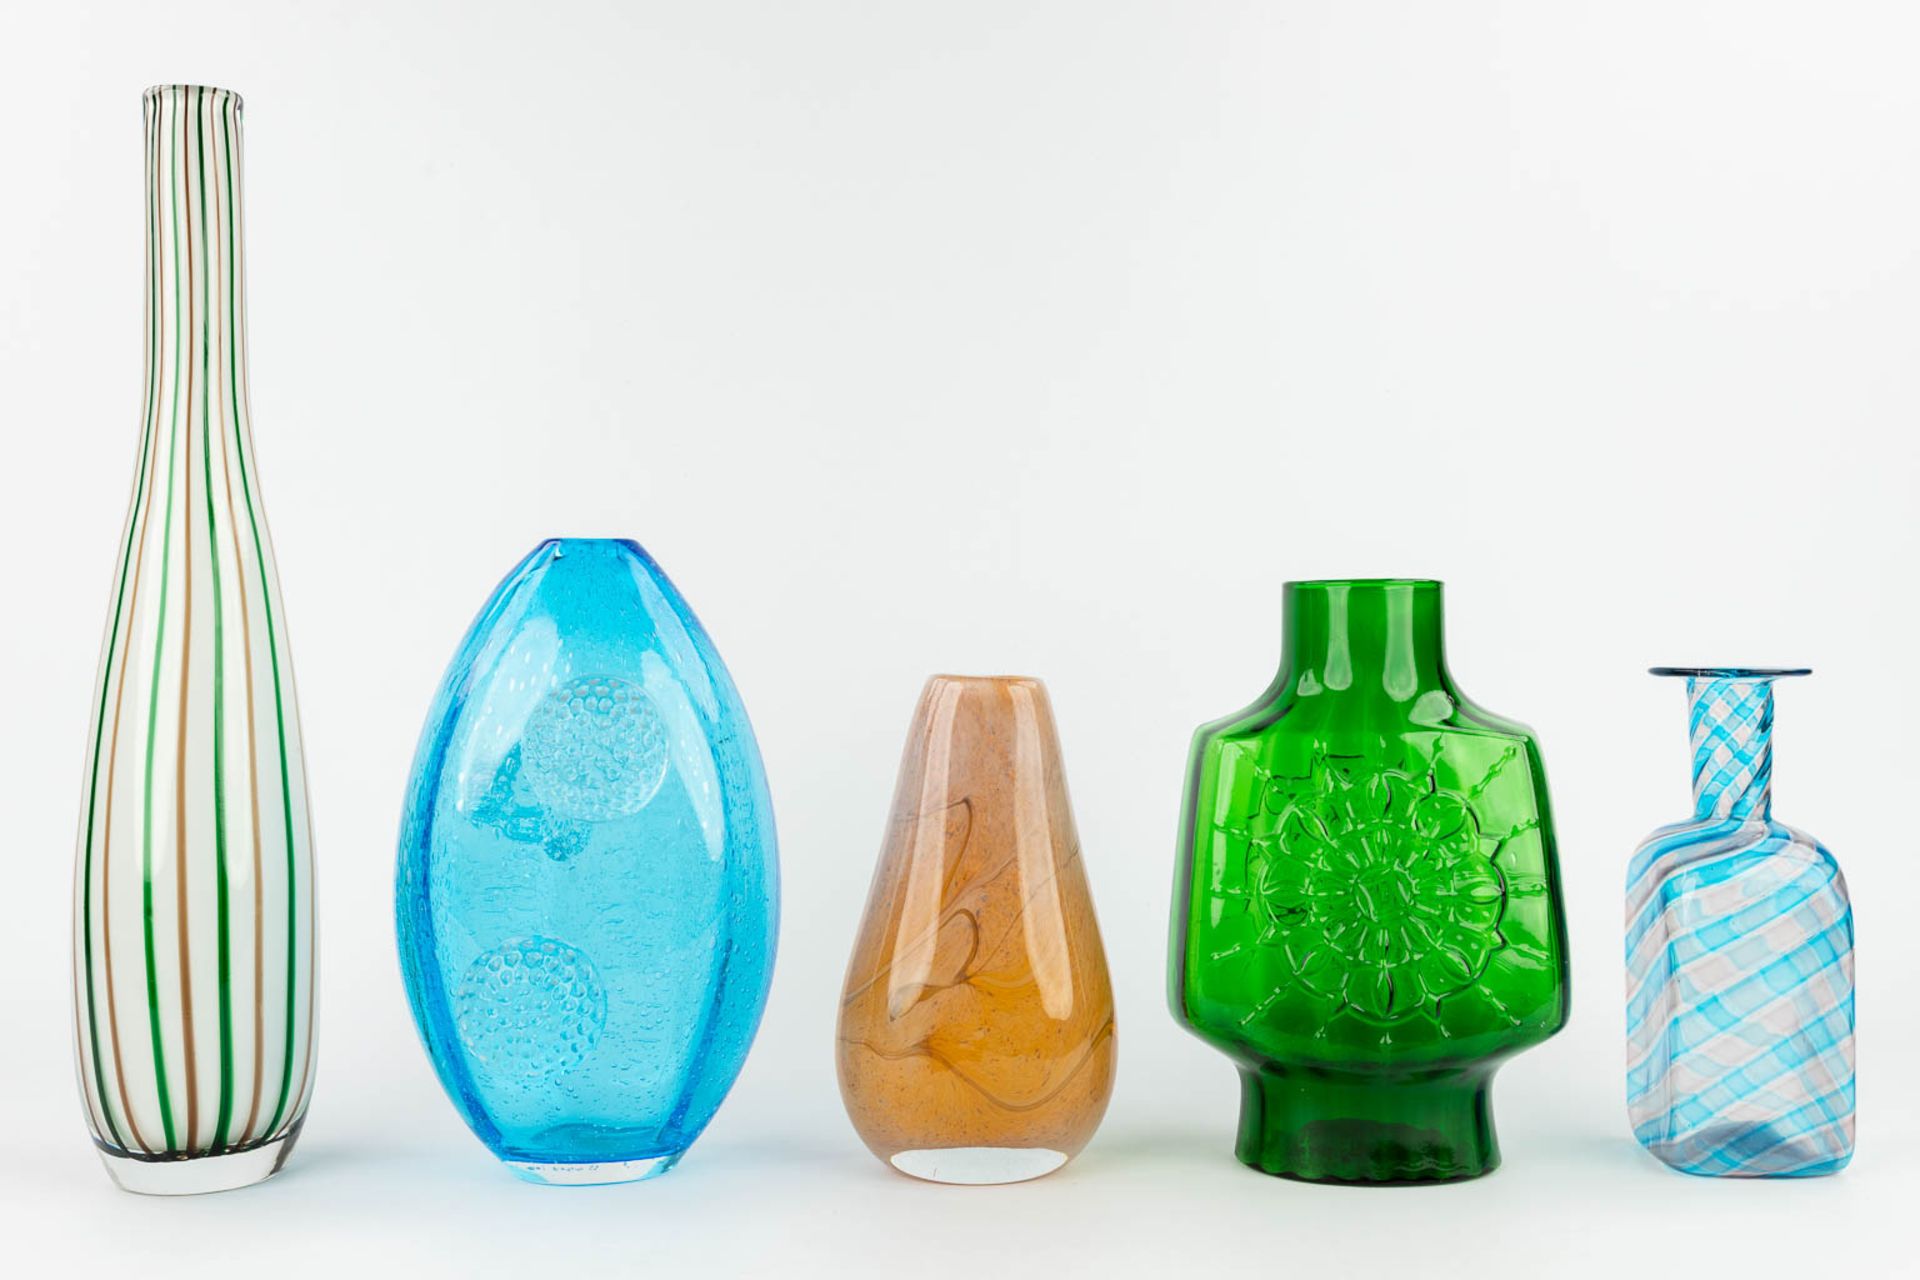 A collection of 5 glass vases, made in Murano, Italy and Scandinavia. (H: 45 x D: 10 cm) - Image 5 of 13